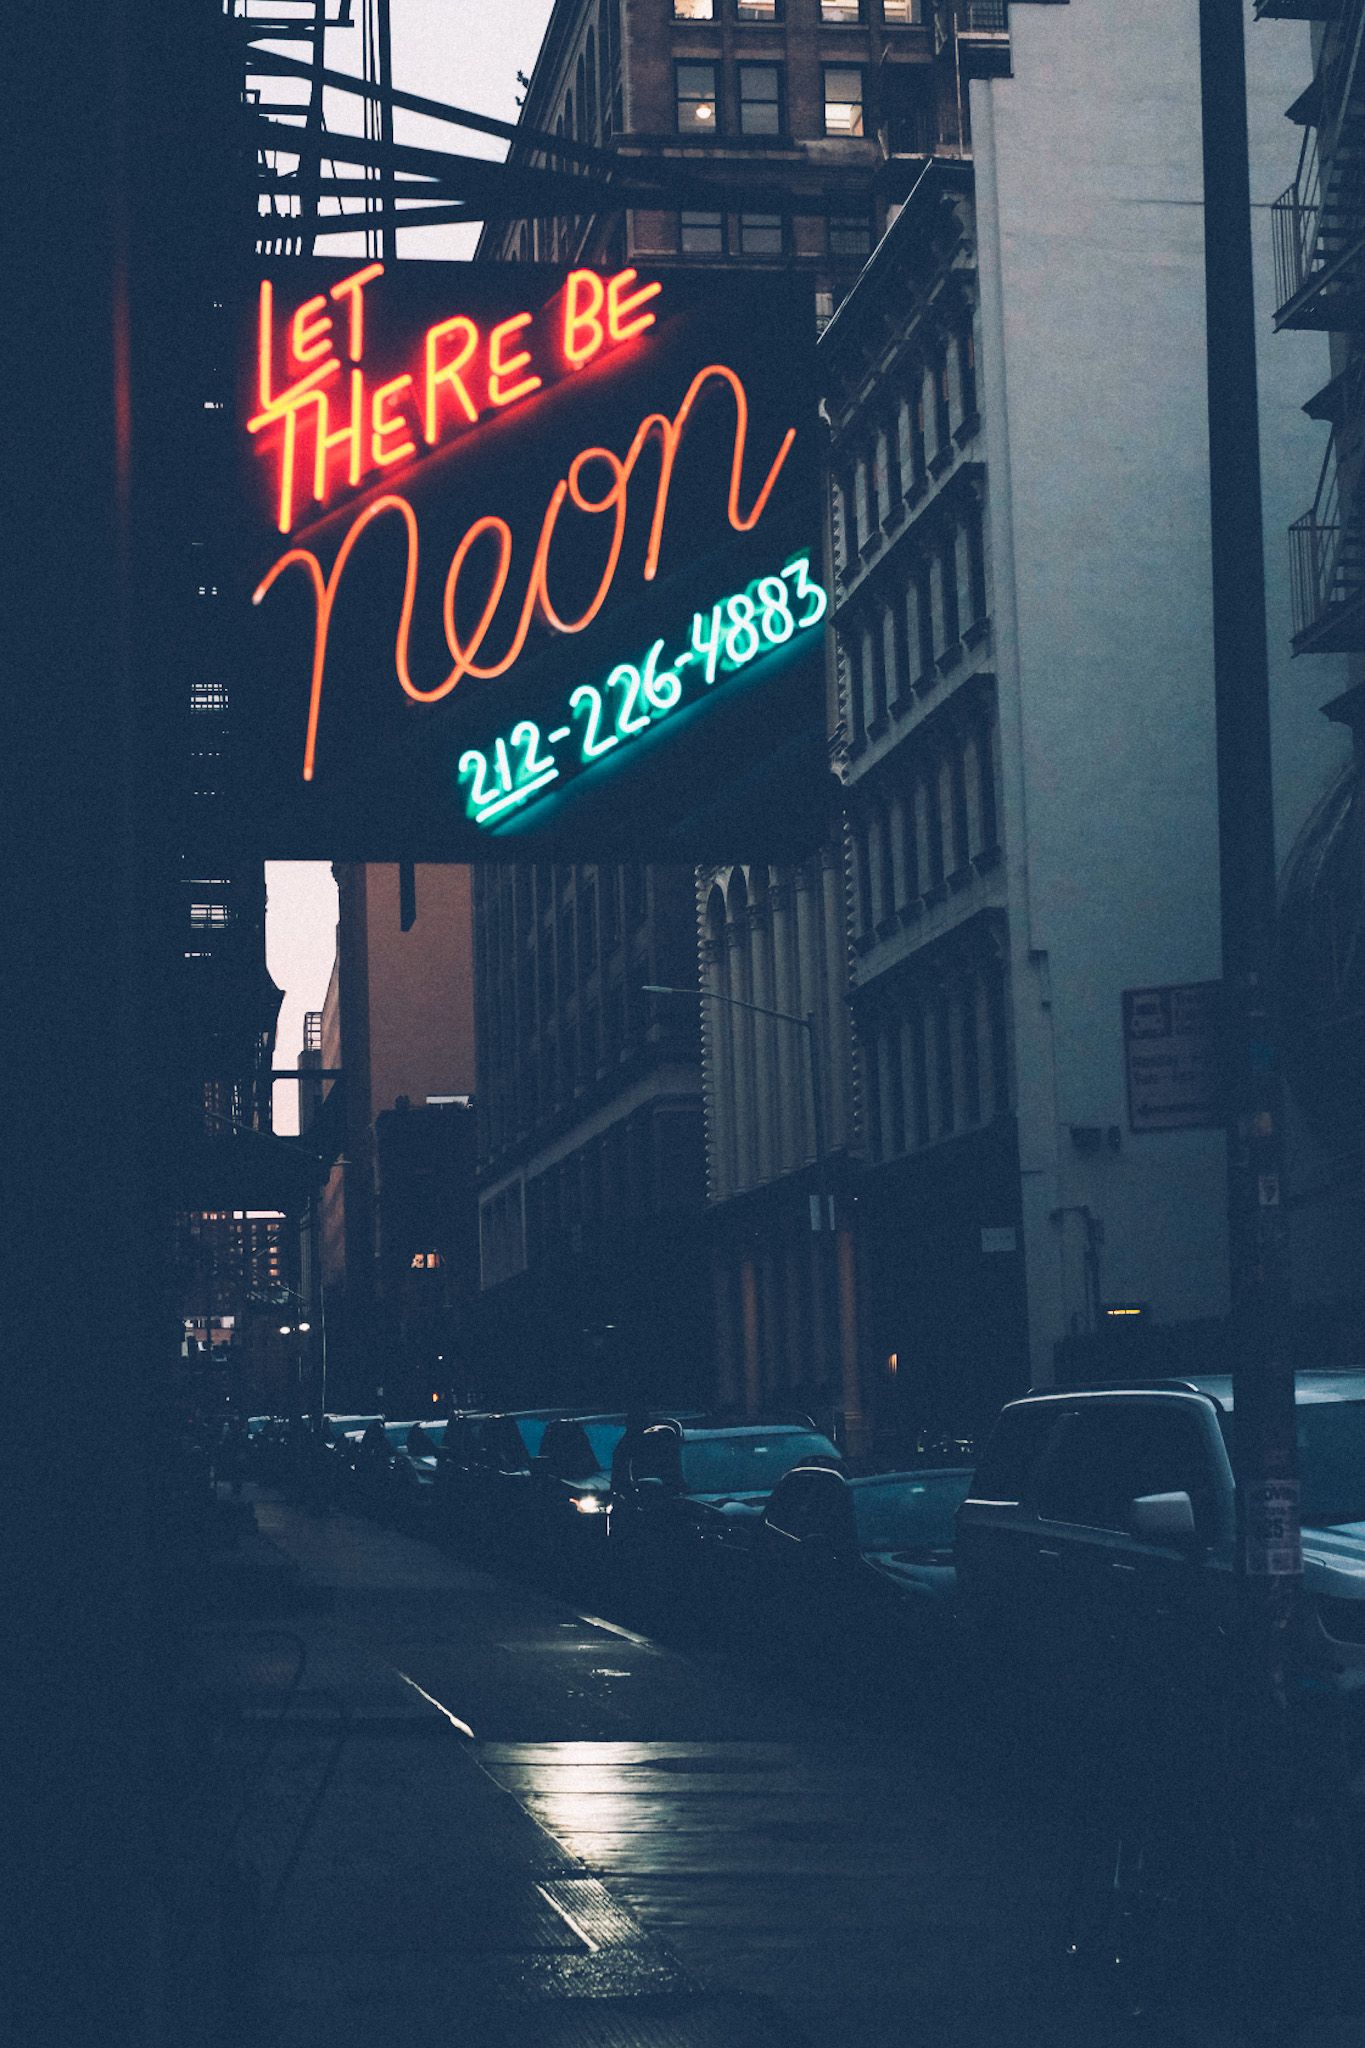 A multicolored neon sign saying “Let there be neon” hangs over a dreary Manhattan street.